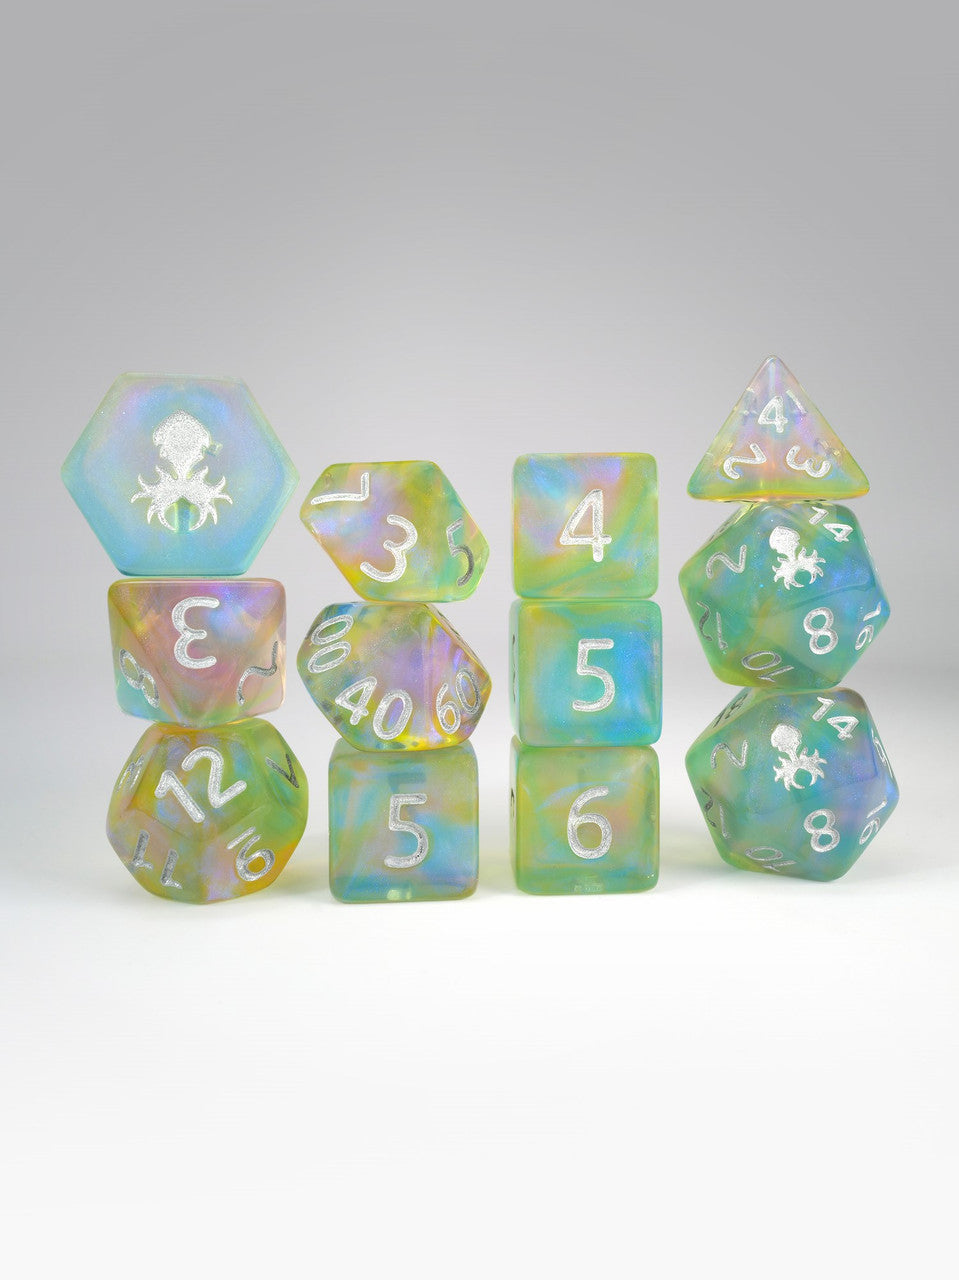 PRAWJECT:25 12pc RPG Dice Set with Silver Ink